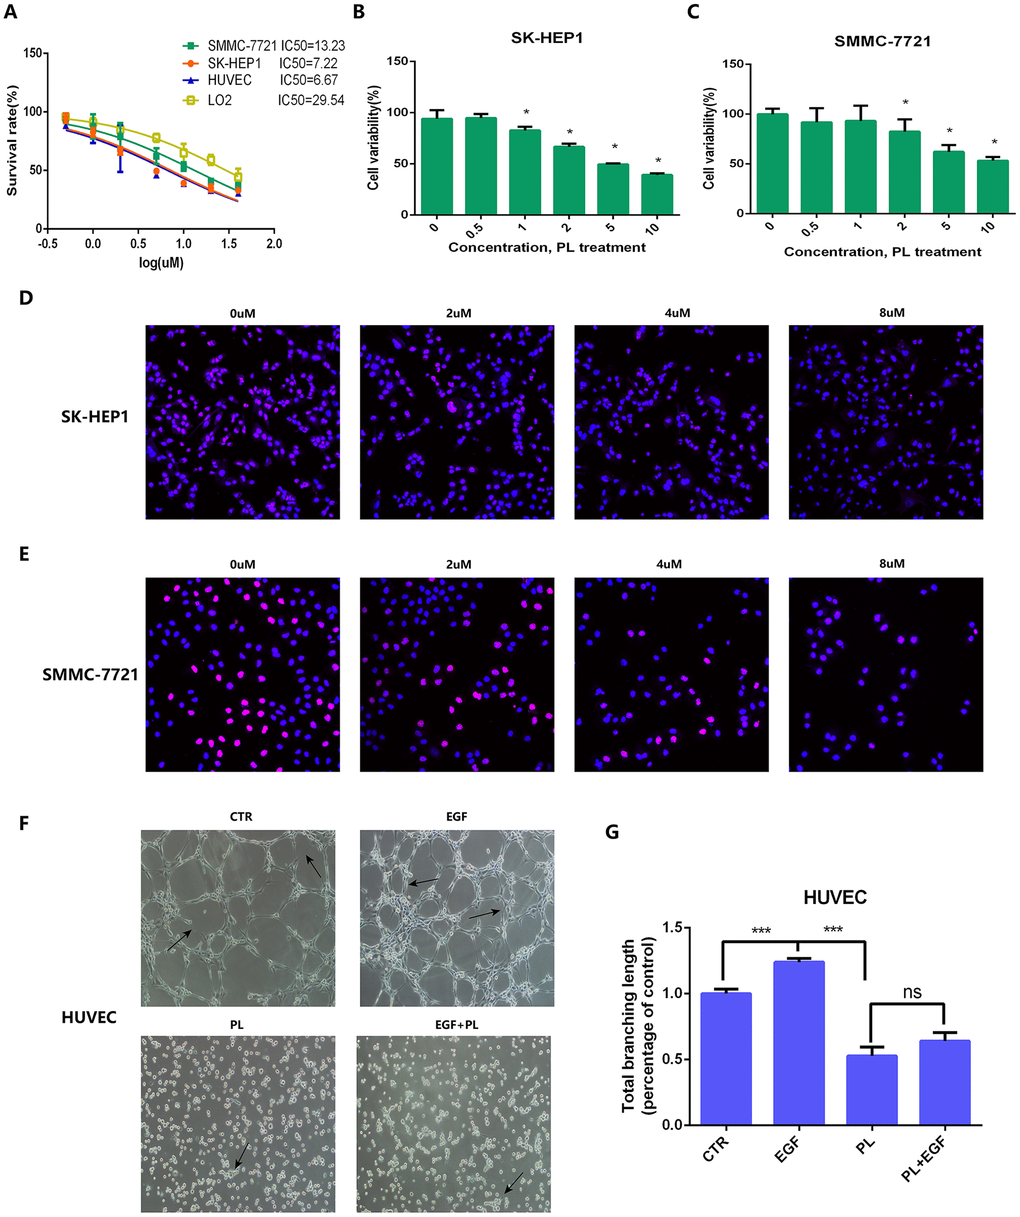 IC50, CCK8 assay, EdU assay and tube formation assay for anti-tumor effect validation of piperlongumine. (A) IC50 of piperlongumine in normal liver cell line (LO2), HUVEC and HCC cell lines. (B, C) CCK8 assay showed piperlongumine inhibited proliferation of SK-HEP1 (B) and SMMC-7721 (C) cell lines in a dose-dependent manner. (D, E) EdU assay showed the inhibition effect of piperlongumine in proliferation of SK-HEP1 (D) and SMMC-7721 (E) cell lines. (F) Tube formation assay suggested that piperlongumine inhibited angiogenesis via EGF/EGFR axis. (G) Statistical analysis to quantify the inhibitory effect of piperlongumine on angiogenesis.